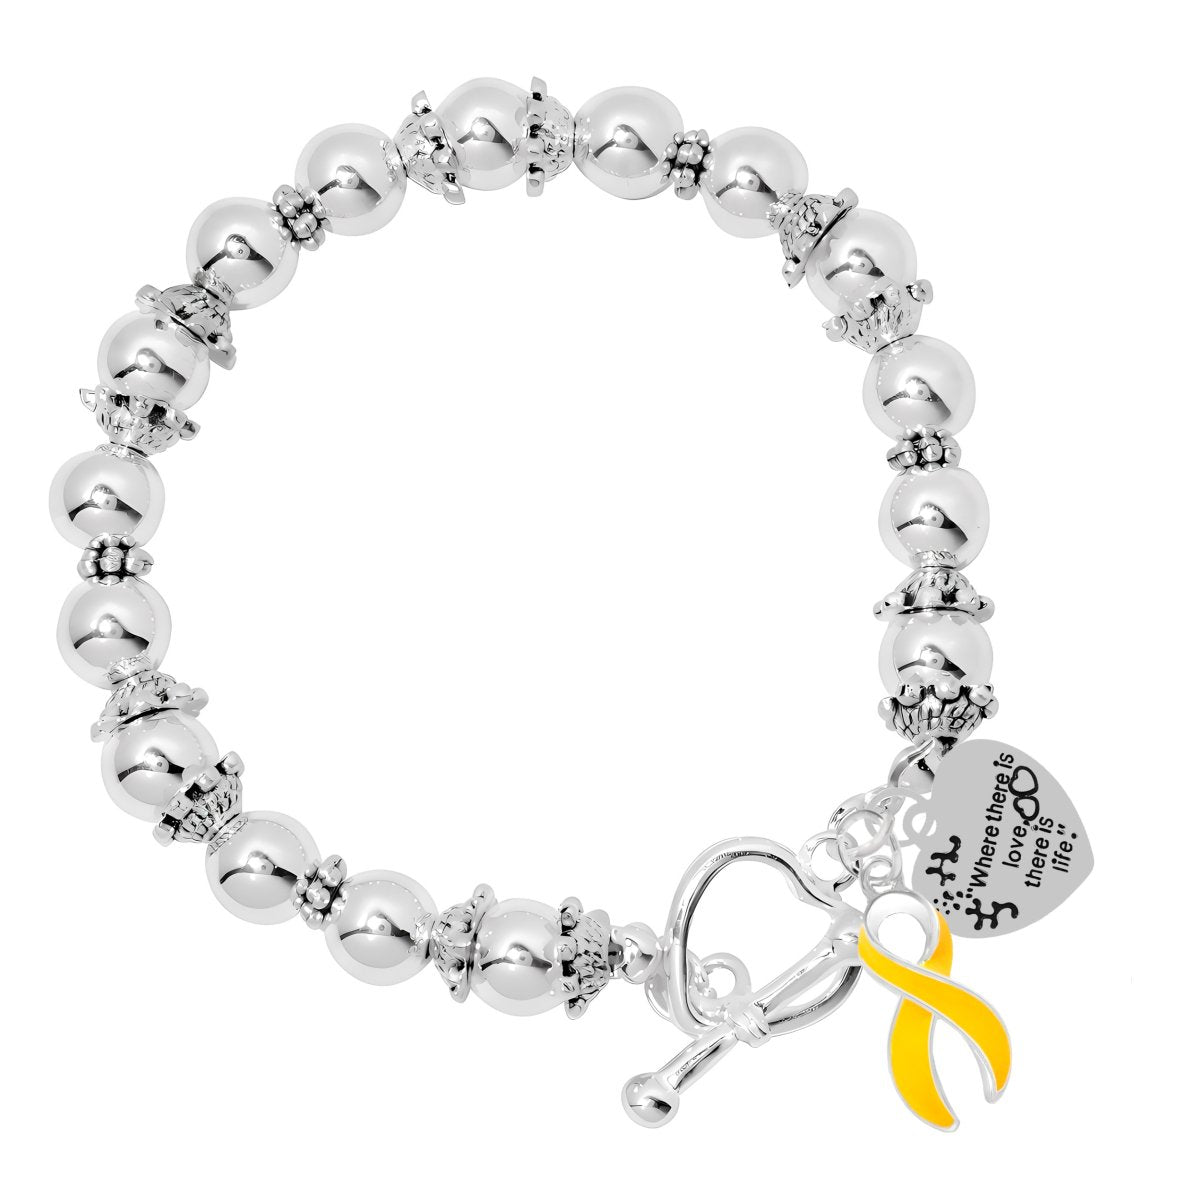 Childhood Cancer Where There is Love Bracelets - Fundraising For A Cause